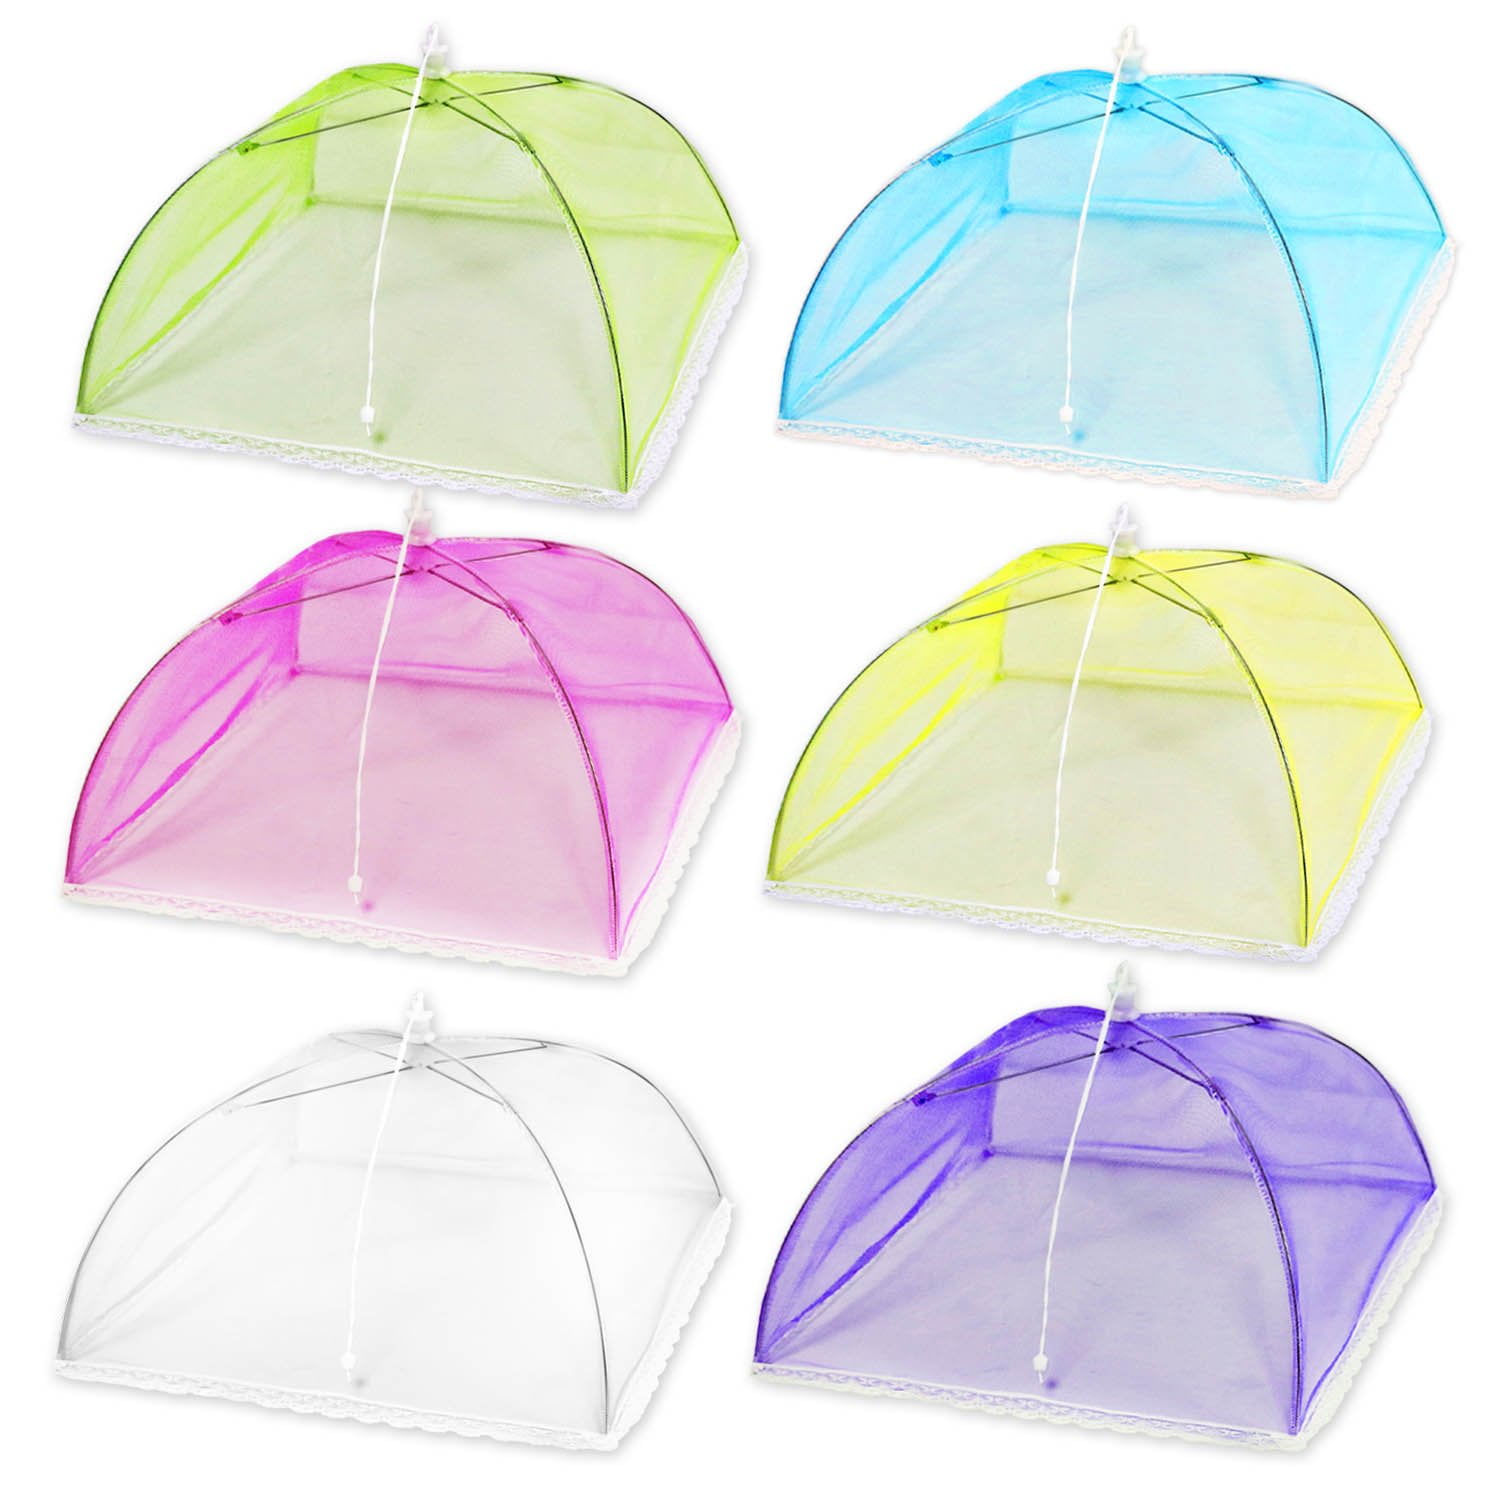 Mesh Screen Protect Food Cover Folding Net Umbrella Kitchen Picnic Food Covers 